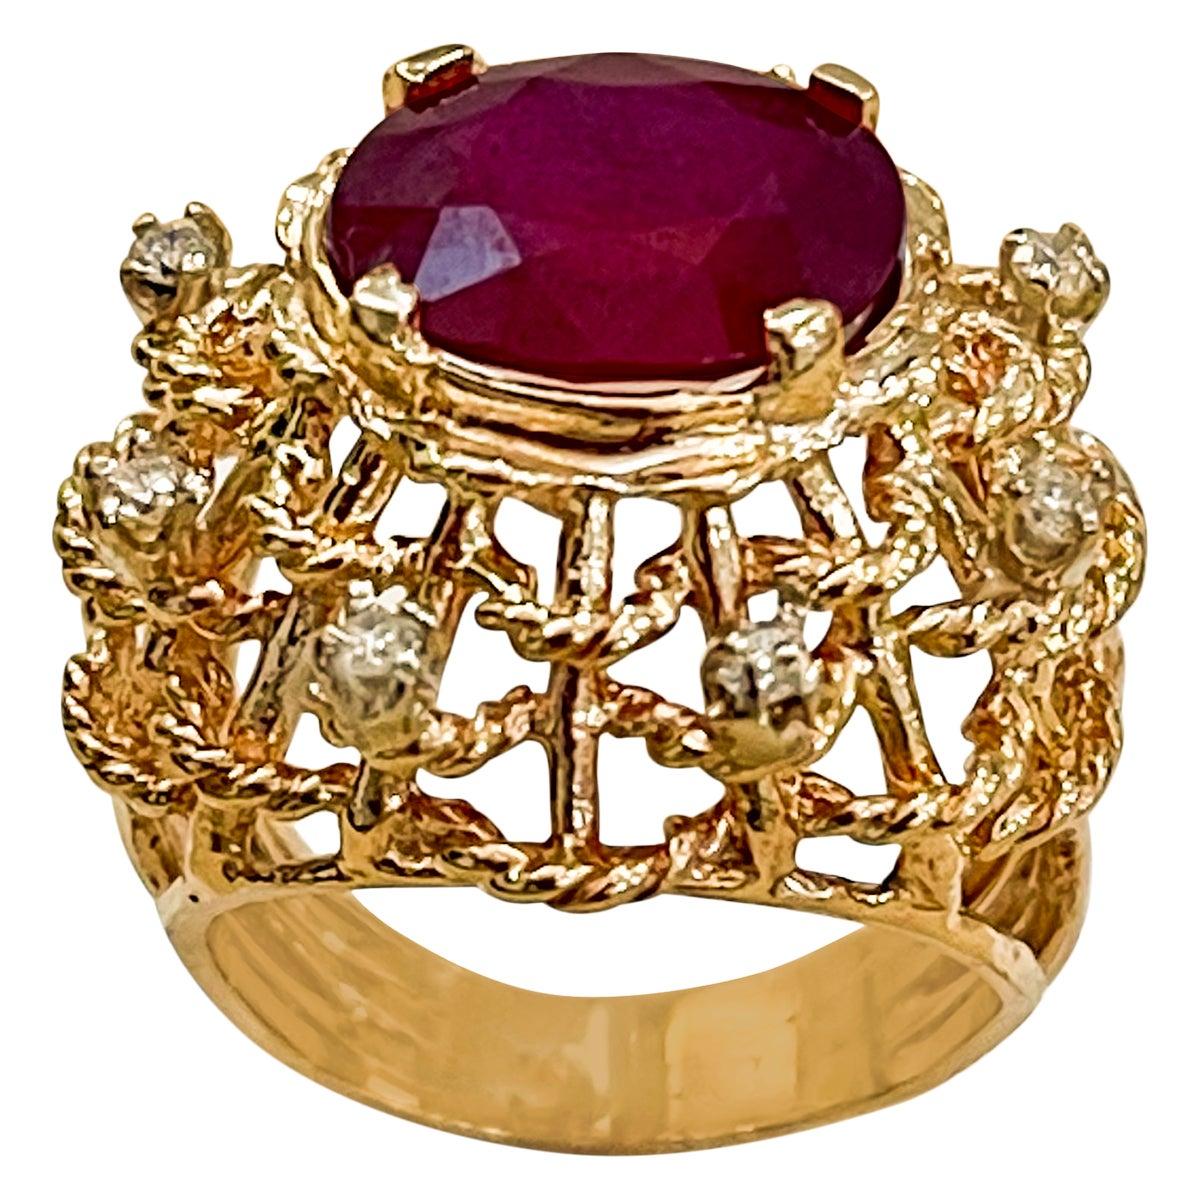 4 Carat Treated Ruby and Diamond 14 Karat Yellow Gold Cocktail Ring